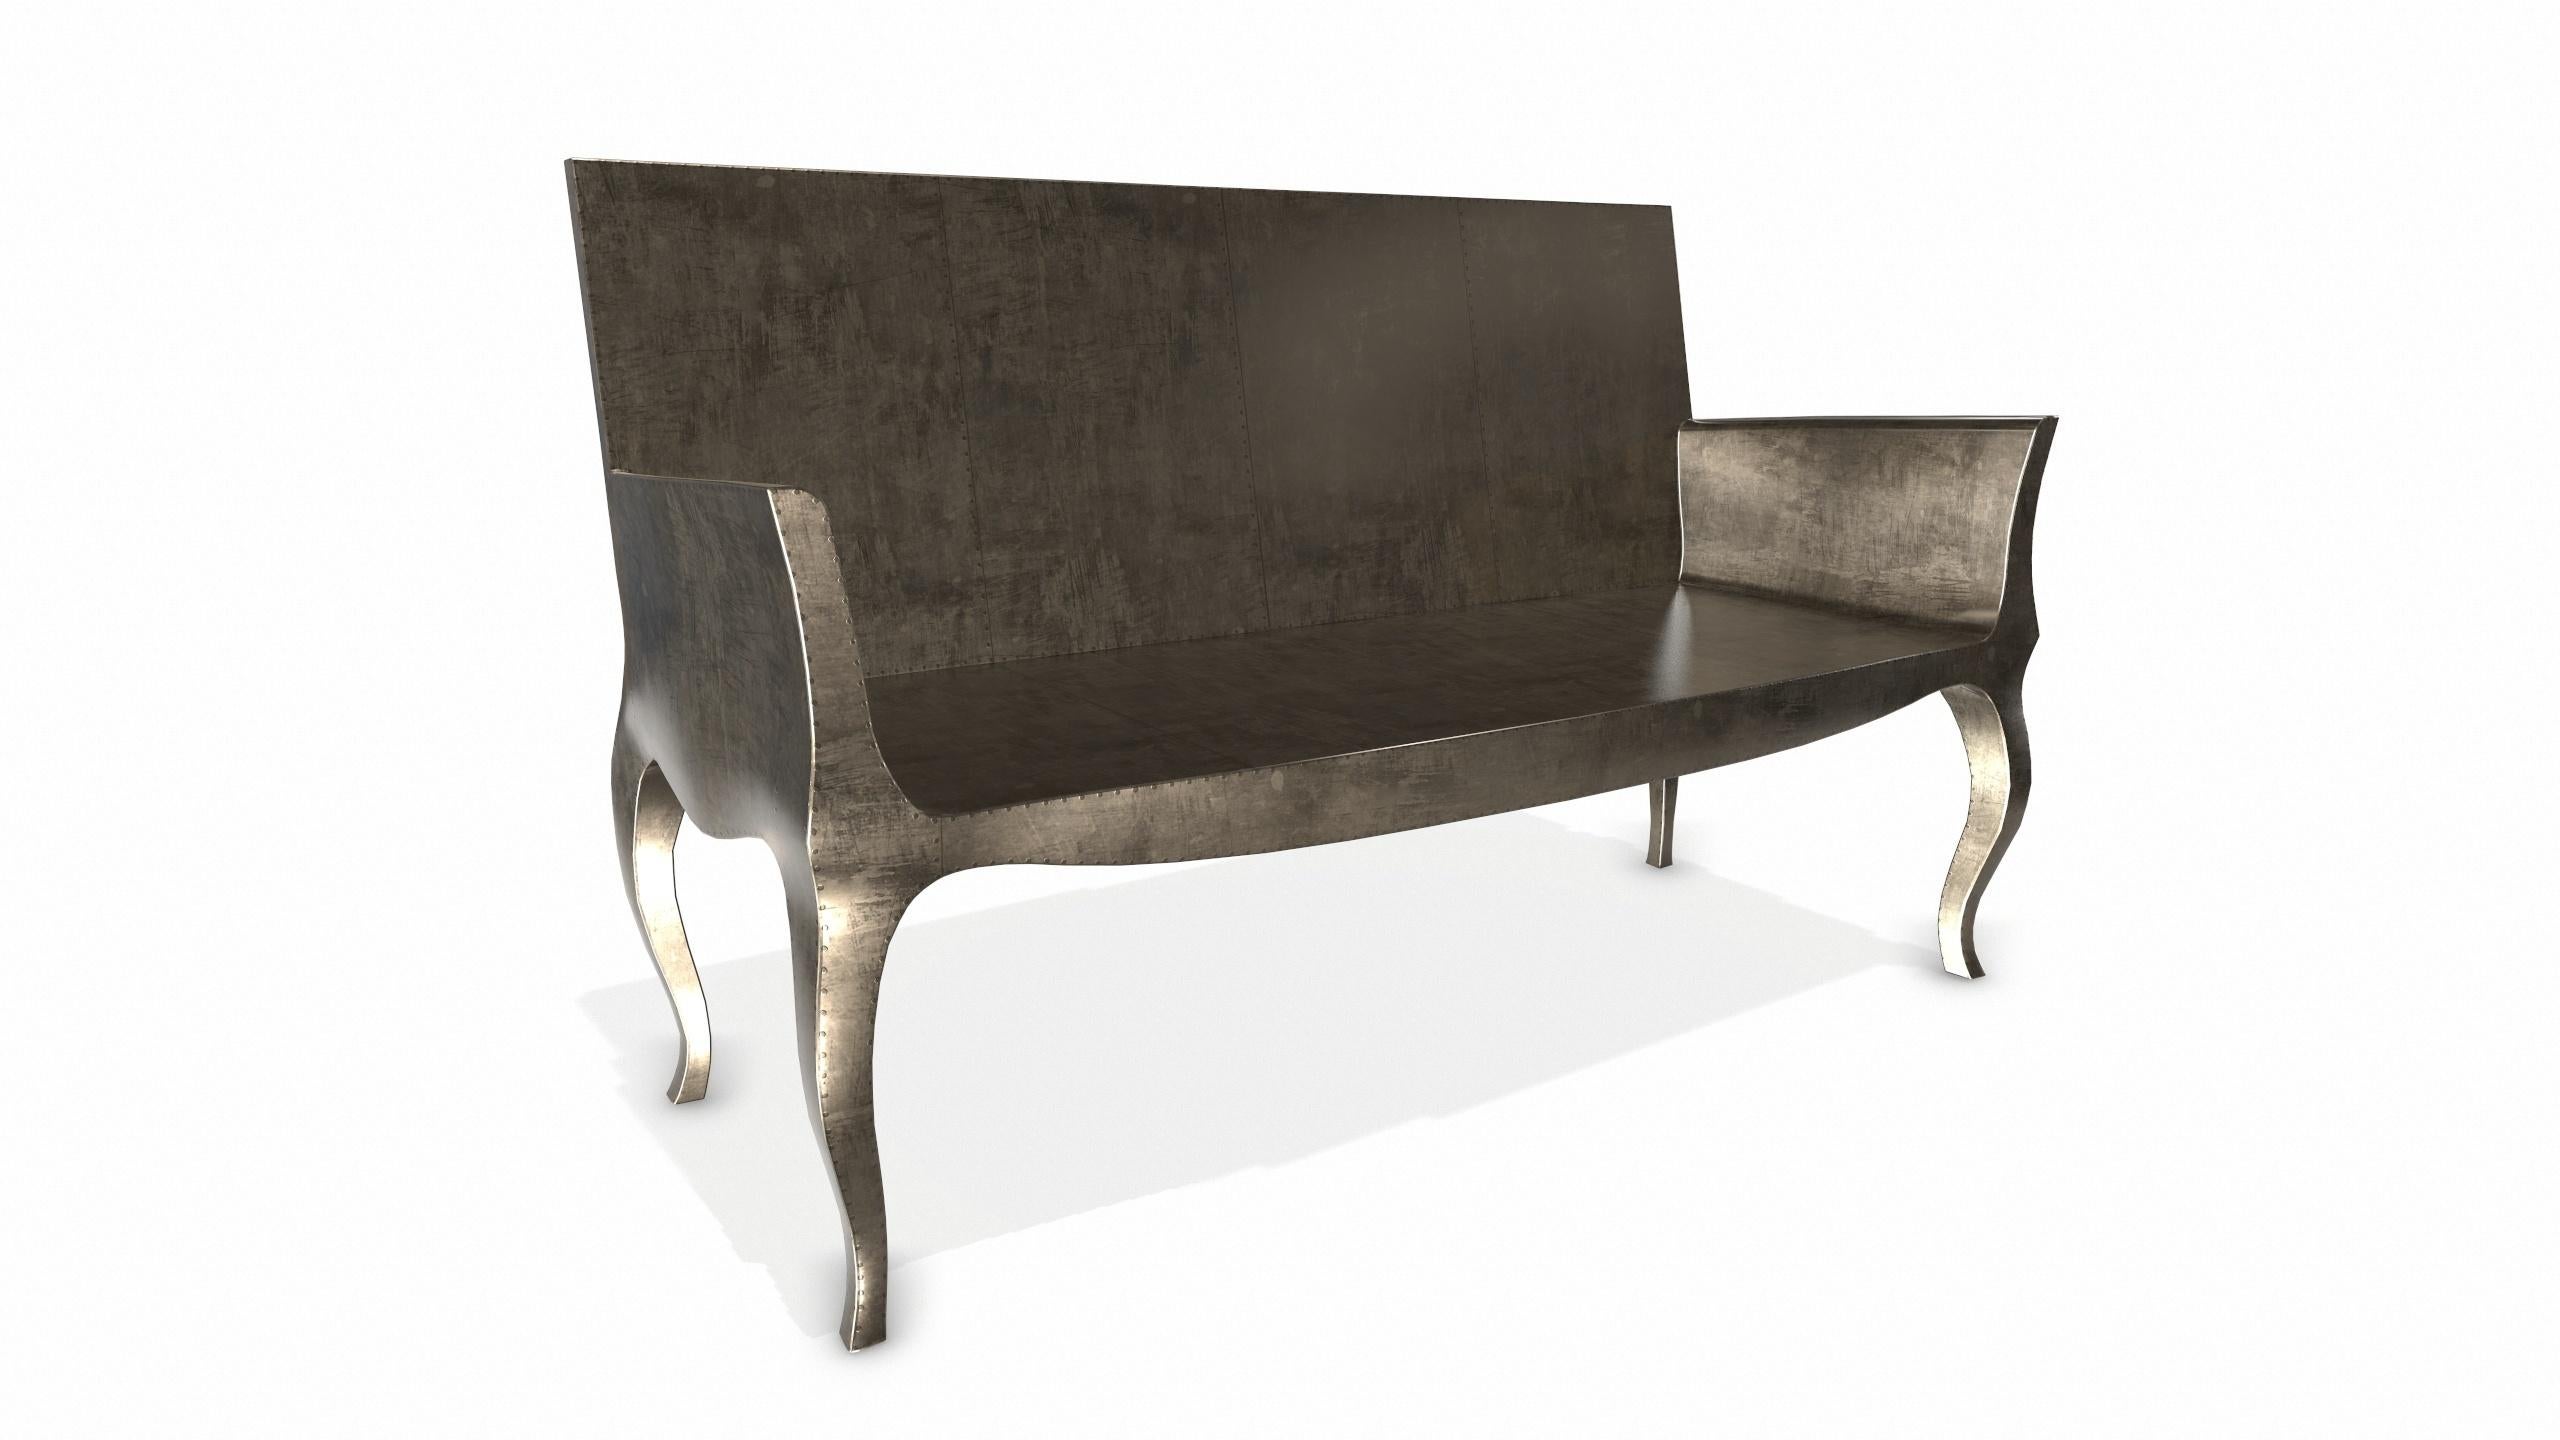 Contemporary Louise Settee Art Deco Canapes in Smooth Antique Bronze by Paul Mathieu For Sale